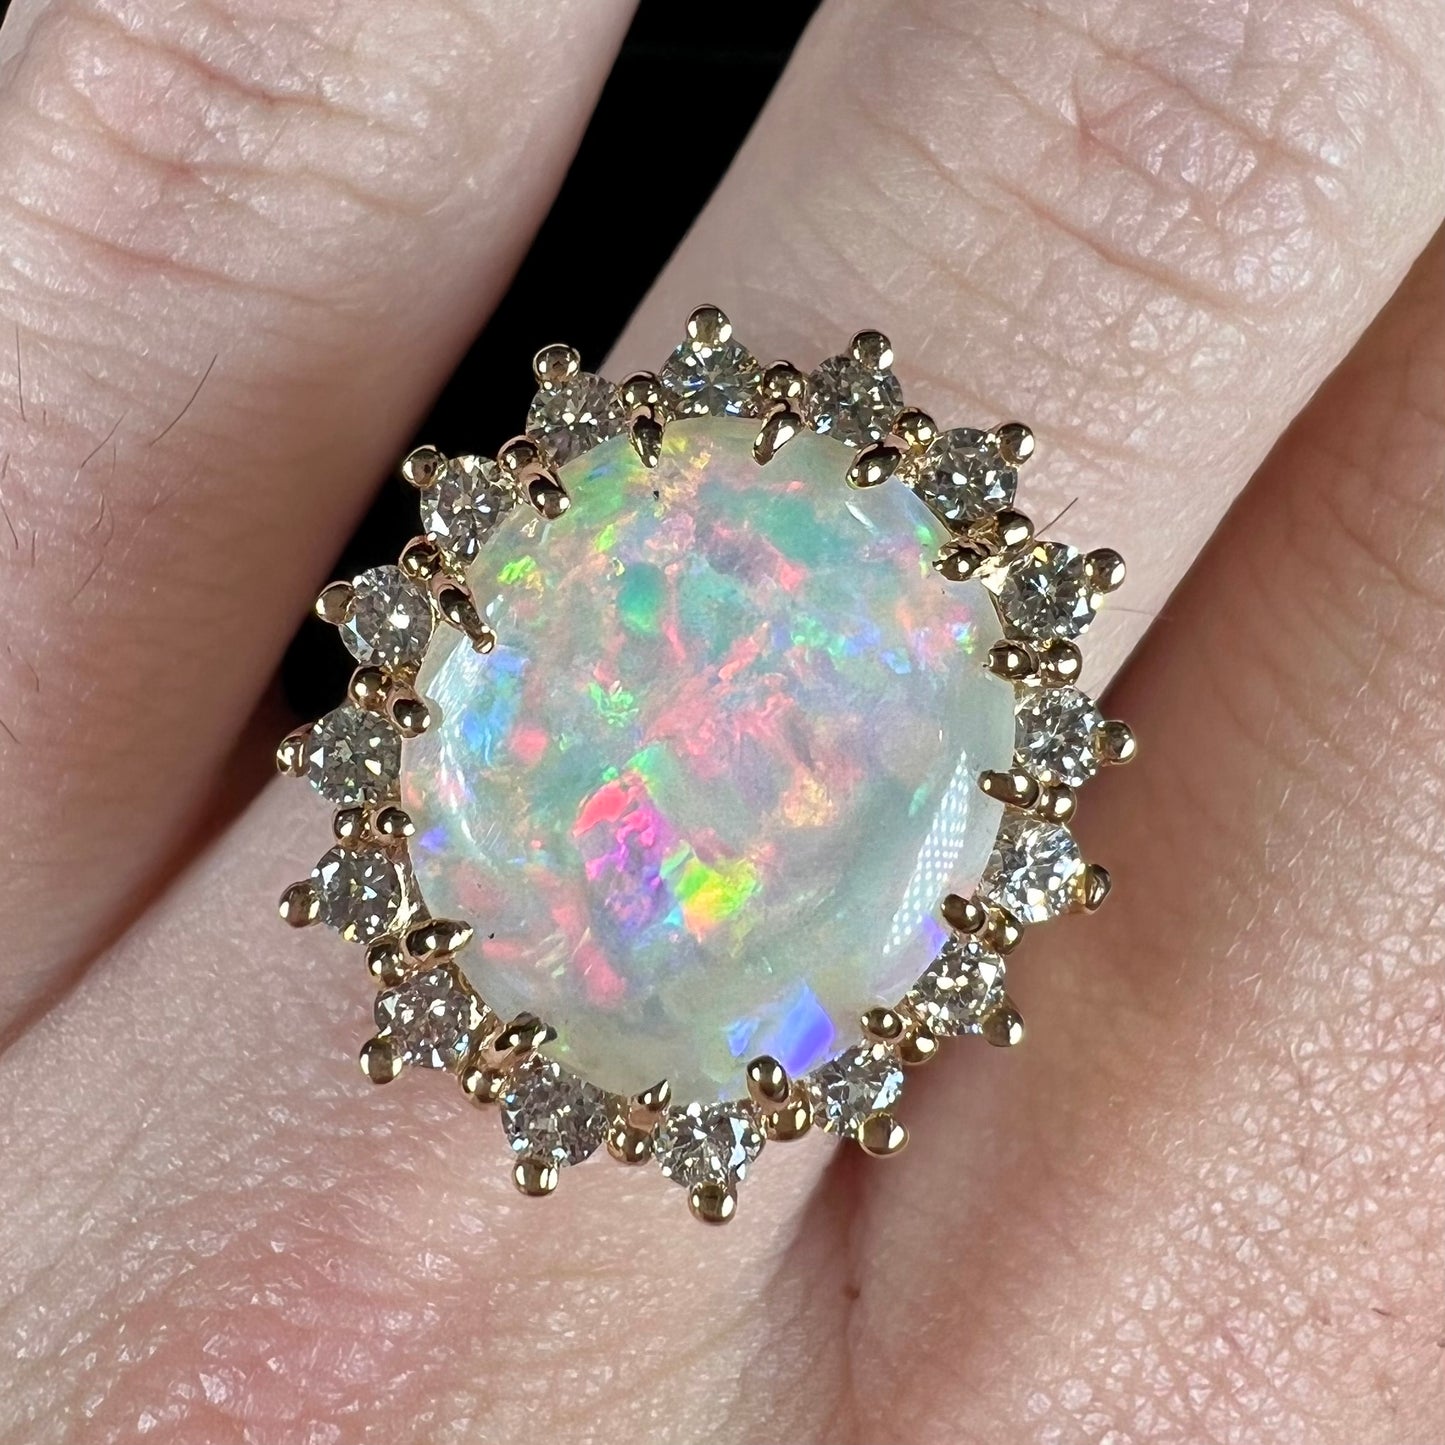 A ladies' diamond halo ring set with a Coober Pedy opalized seashell in yellow gold.